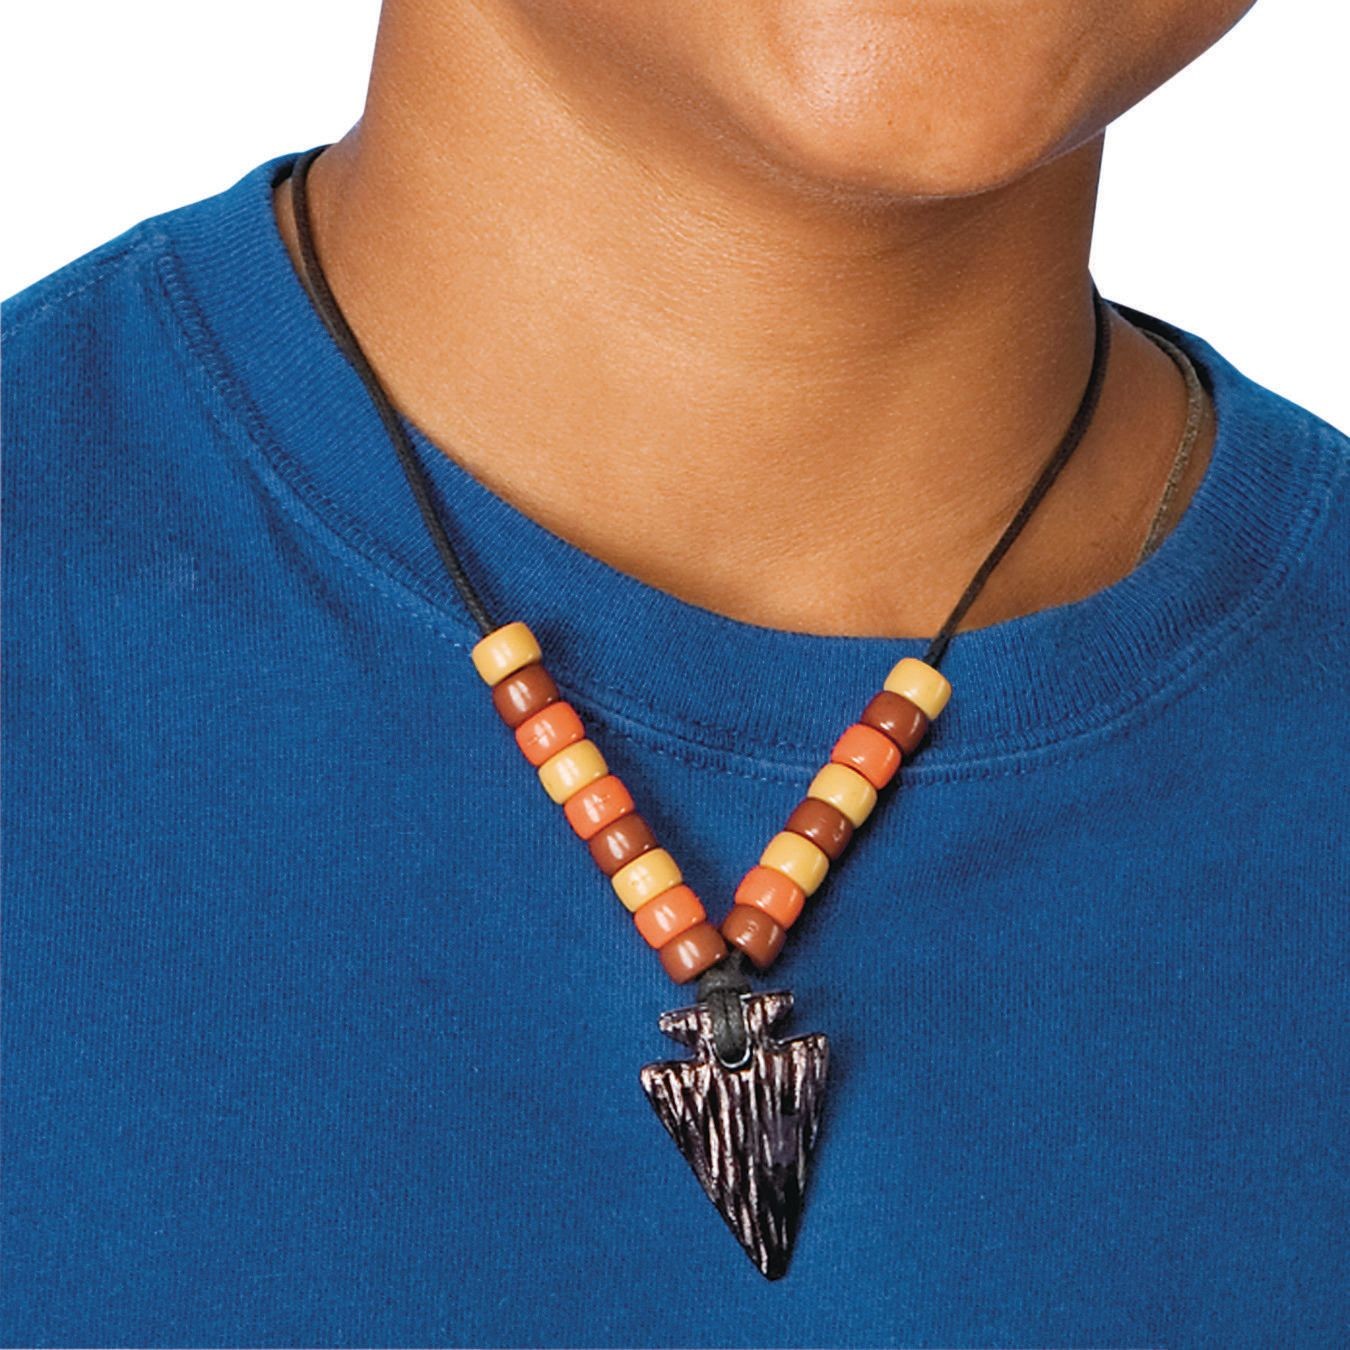 Luck Strings Agate Arrowhead Pendant Necklace for Men Women Unisex -  Adjustable Stone Gemstone Rope Cord Surfer Choker Arrow Point Tribal Native  American Jewelry Gift (Browns, Onee Size) | Amazon.com